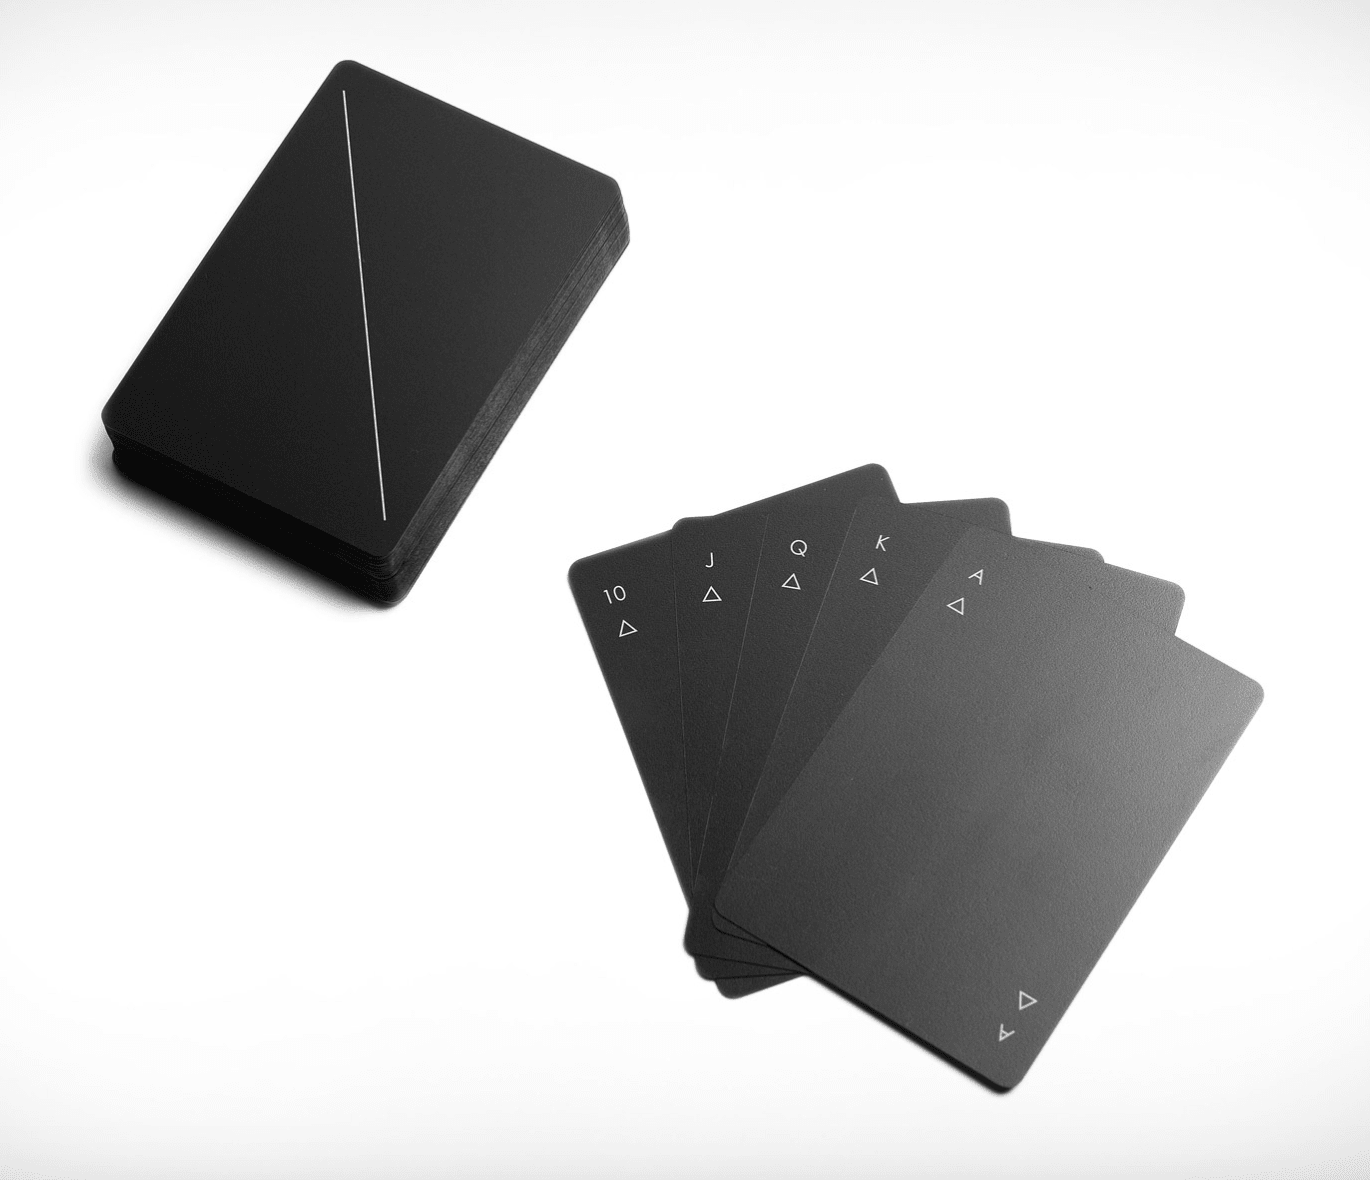 Minim Playing Cards  Black aesthetic, Playing cards design, Black